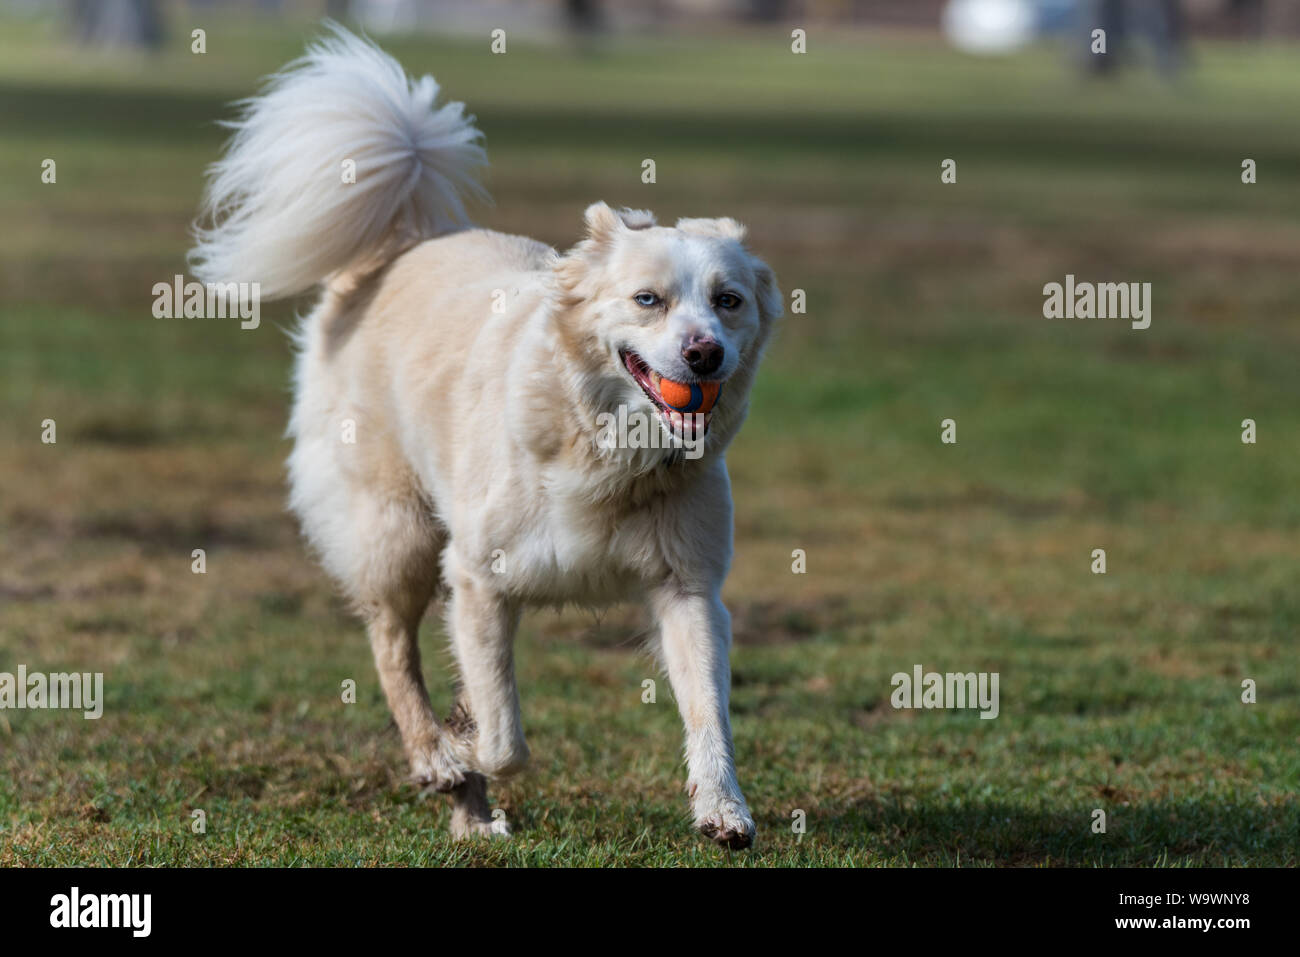 Tired Australian Shepard dog jogging with ball in mouth with smile on face. Stock Photo